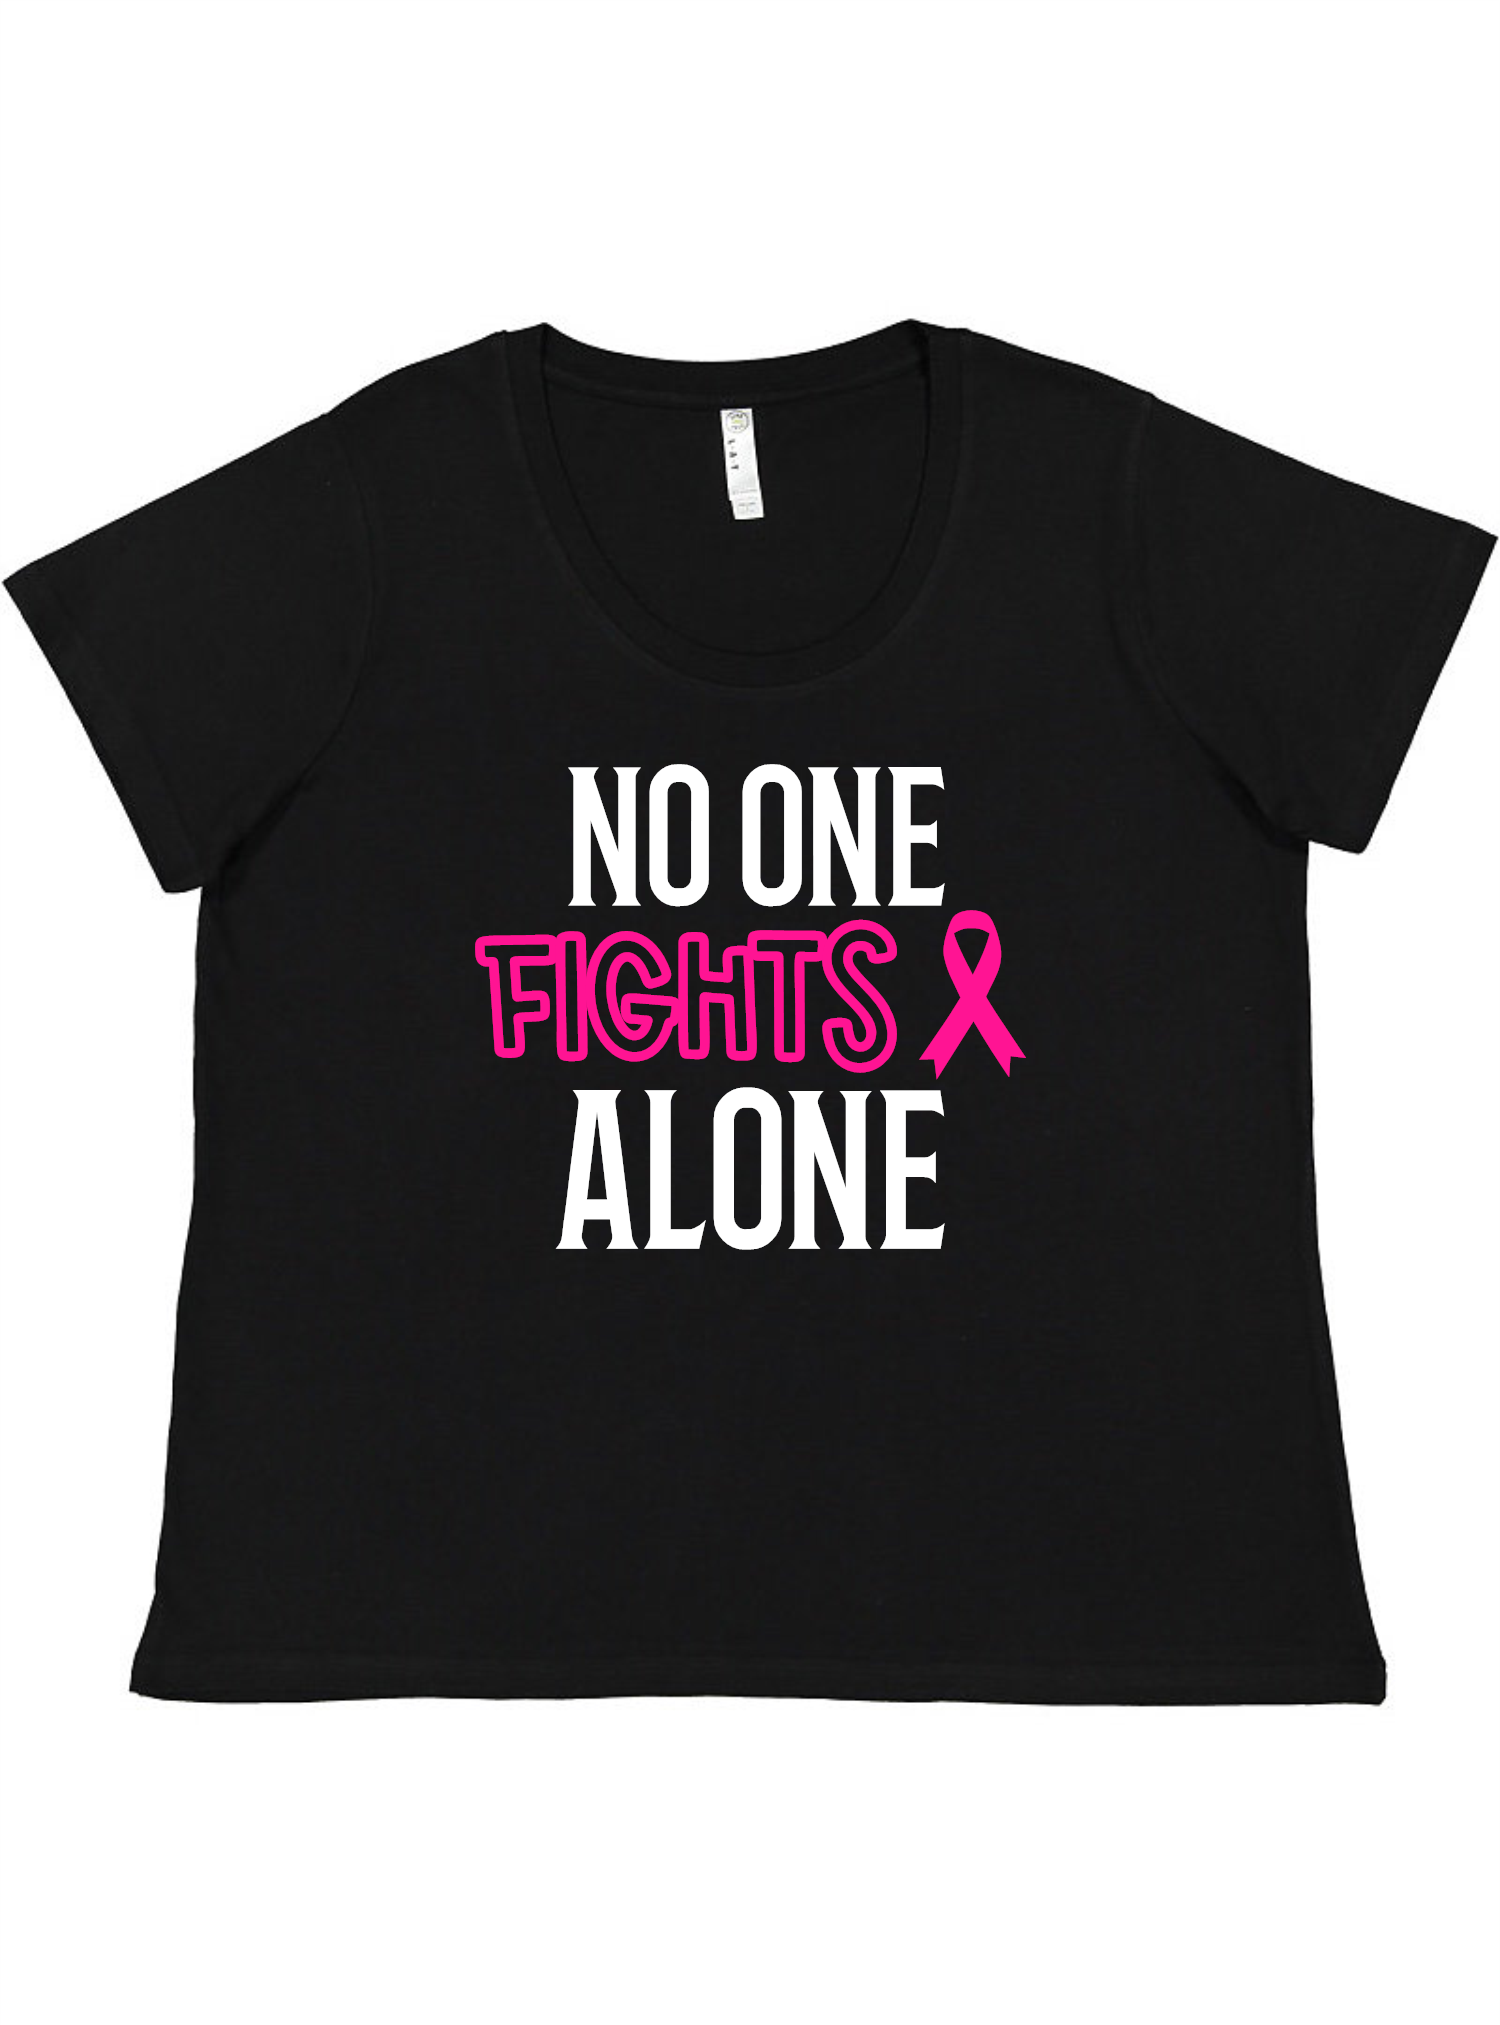 No one fights alone Ladies Tee Ladies Shirt by Akron Pride Custom Tees | Akron Pride Custom Tees